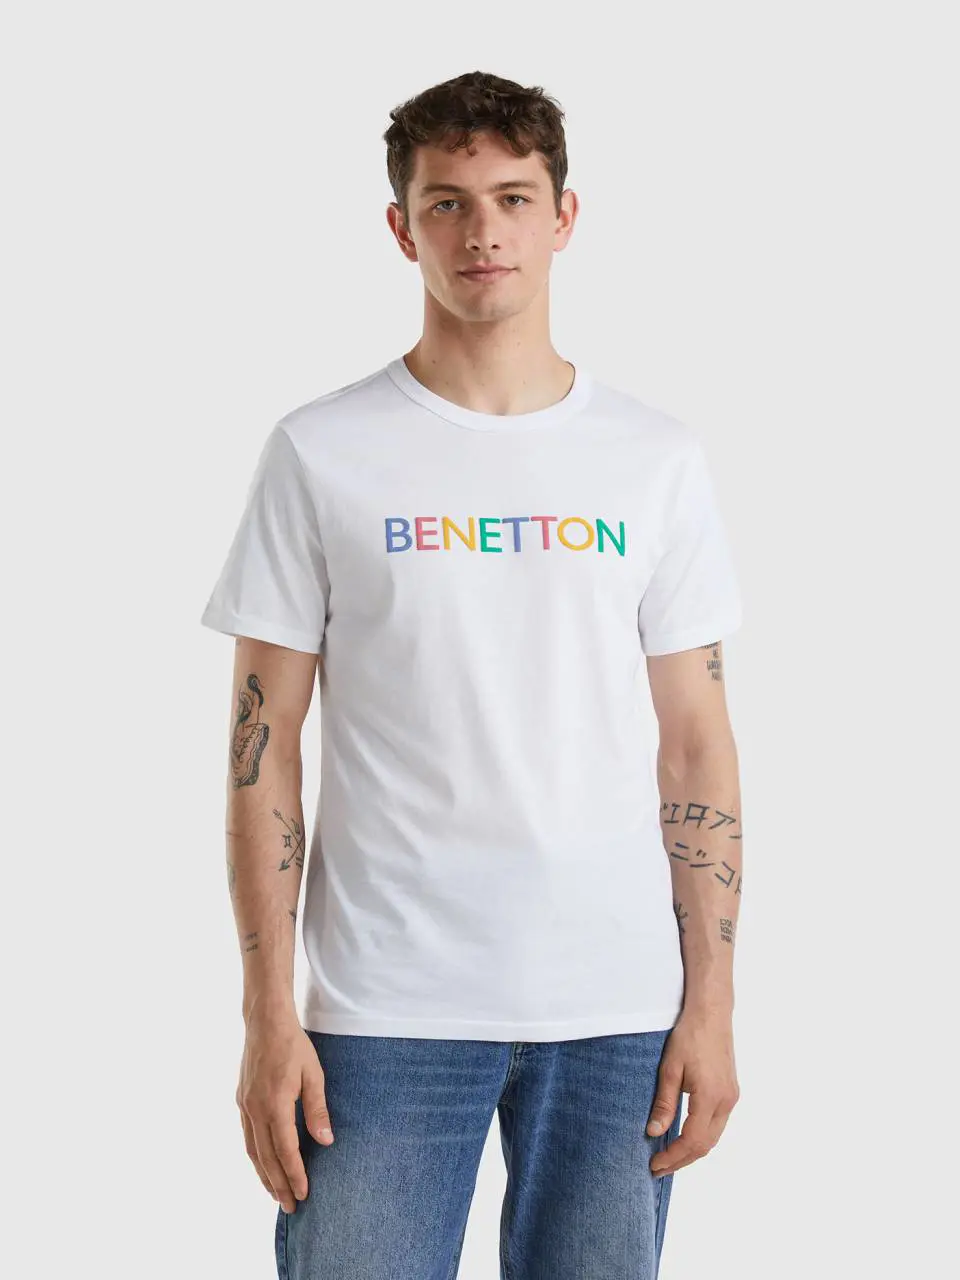 Benetton white t-shirt in organic cotton with multicolored logo. 1